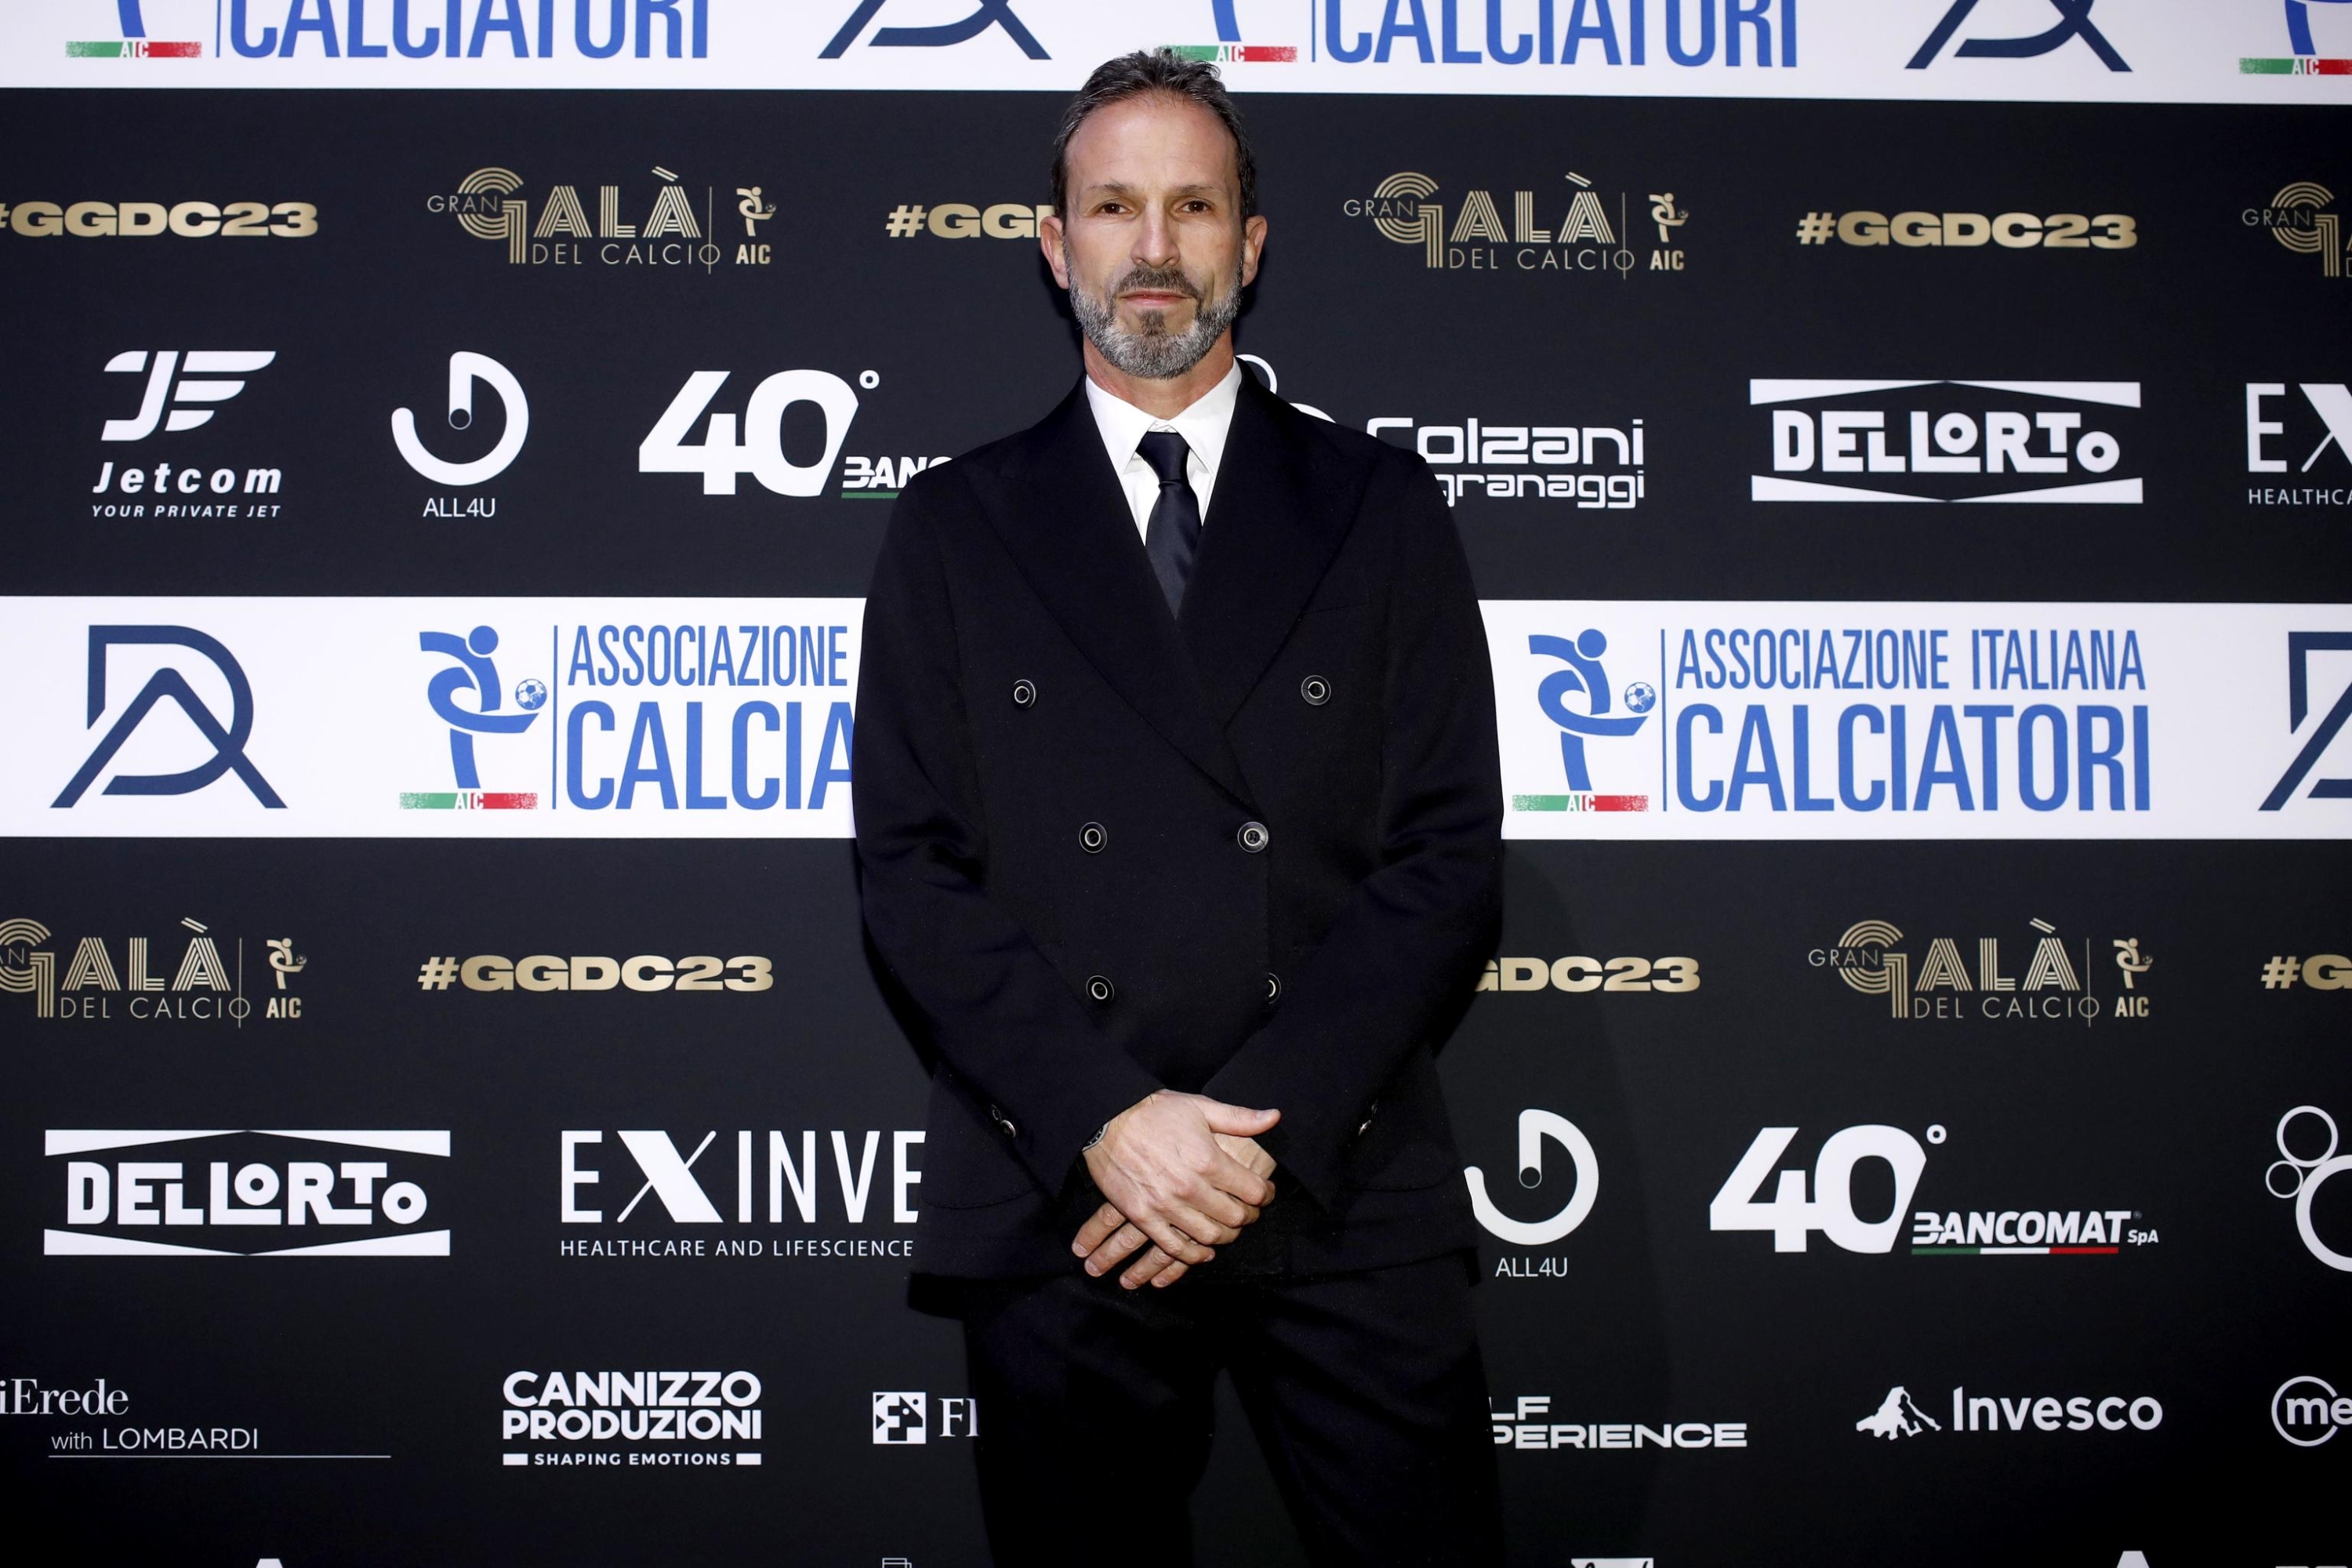 Umberto Calcagno in occasion of the 2023 edition of the event "Gran Gala Football AIC" organized by the Italian Footballers Association, in Milan, Italy, 04 December 2023. ANSA/MOURAD BALTI TOUATI